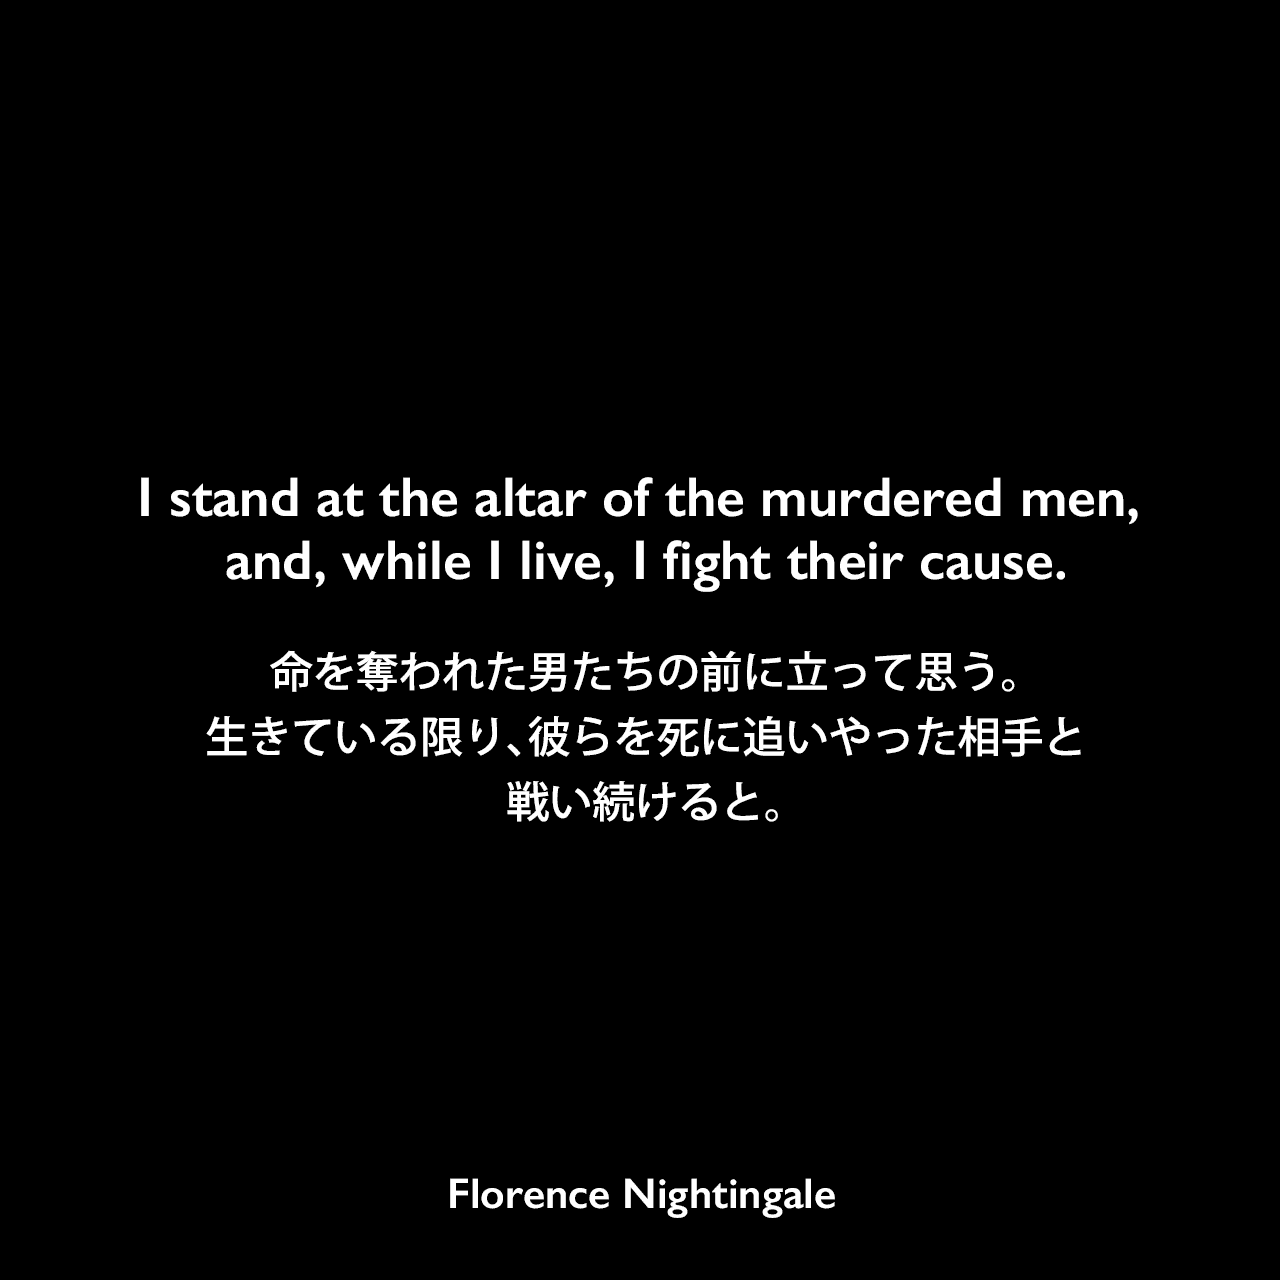 I stand at the altar of the murdered men, and, while I live, I fight their cause.命を奪われた男たちの前に立って思う。生きている限り、彼らを死に追いやった相手と戦い続けると。Florence Nightingale